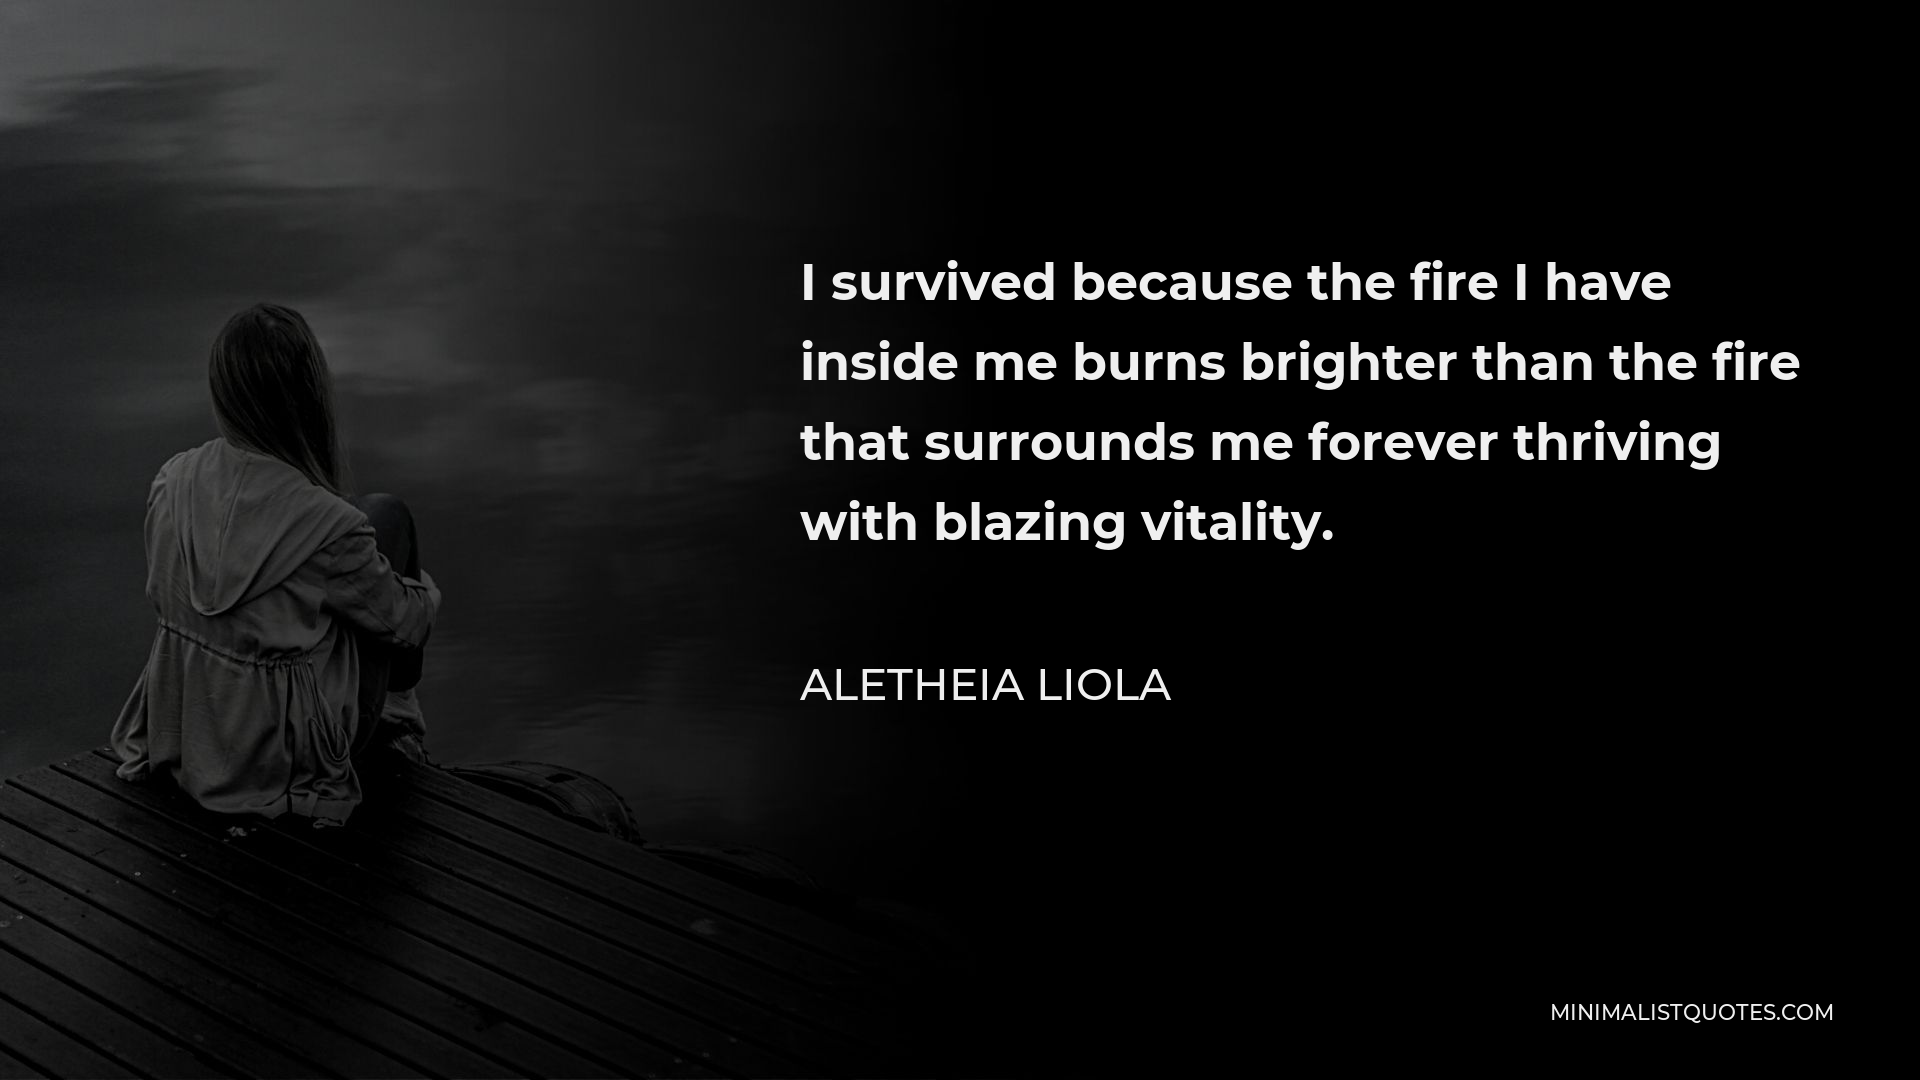 Aletheia Liola Quote - I survived because the fire I have inside me burns brighter than the fire that surrounds me forever thriving with blazing vitality.